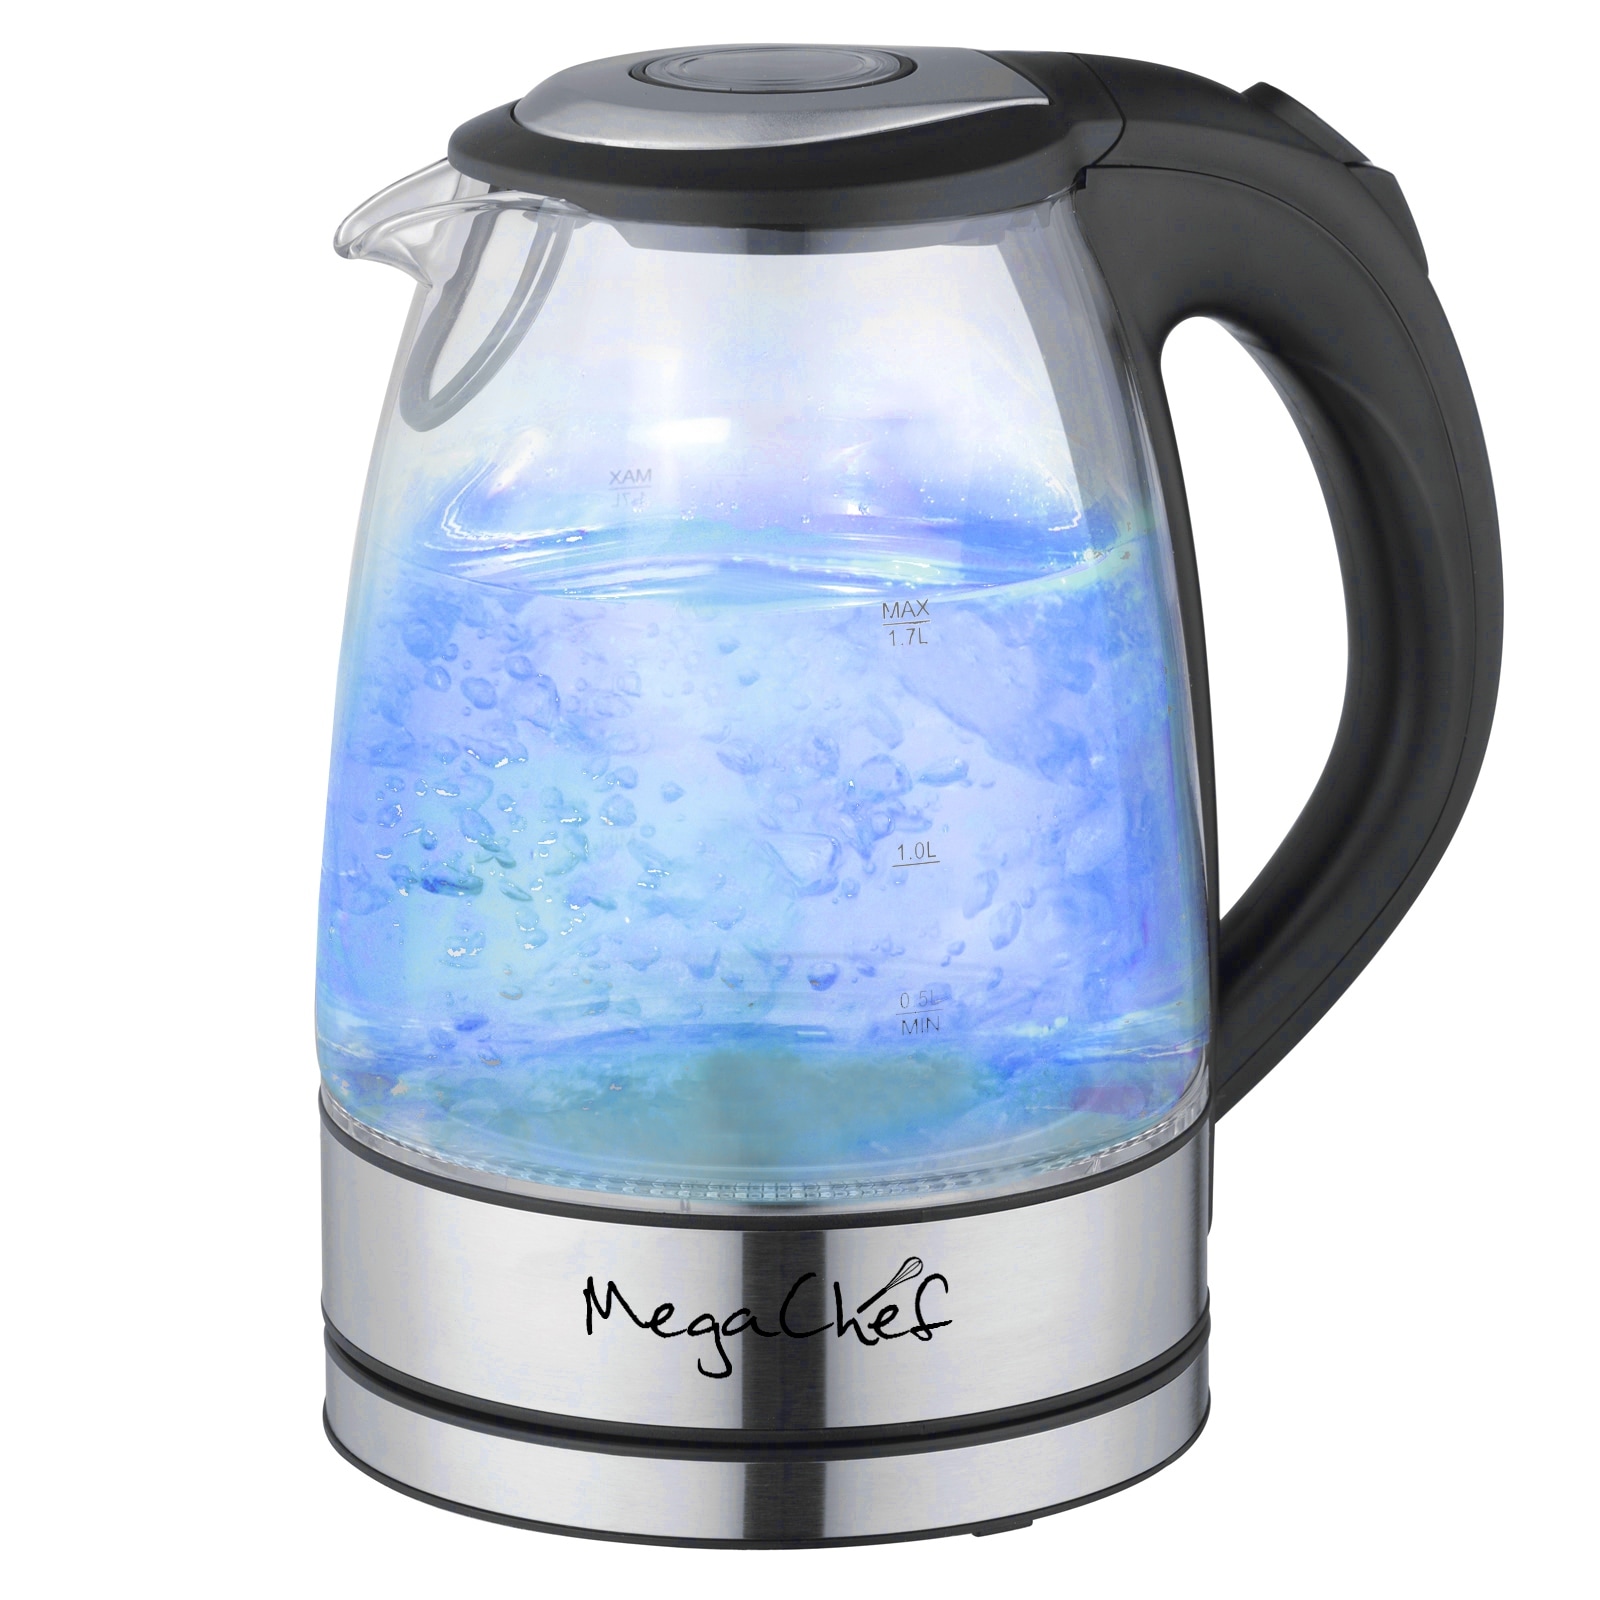 Restored Glass Electric Kettle, 1.7 Liter Capacity, Copper Finish